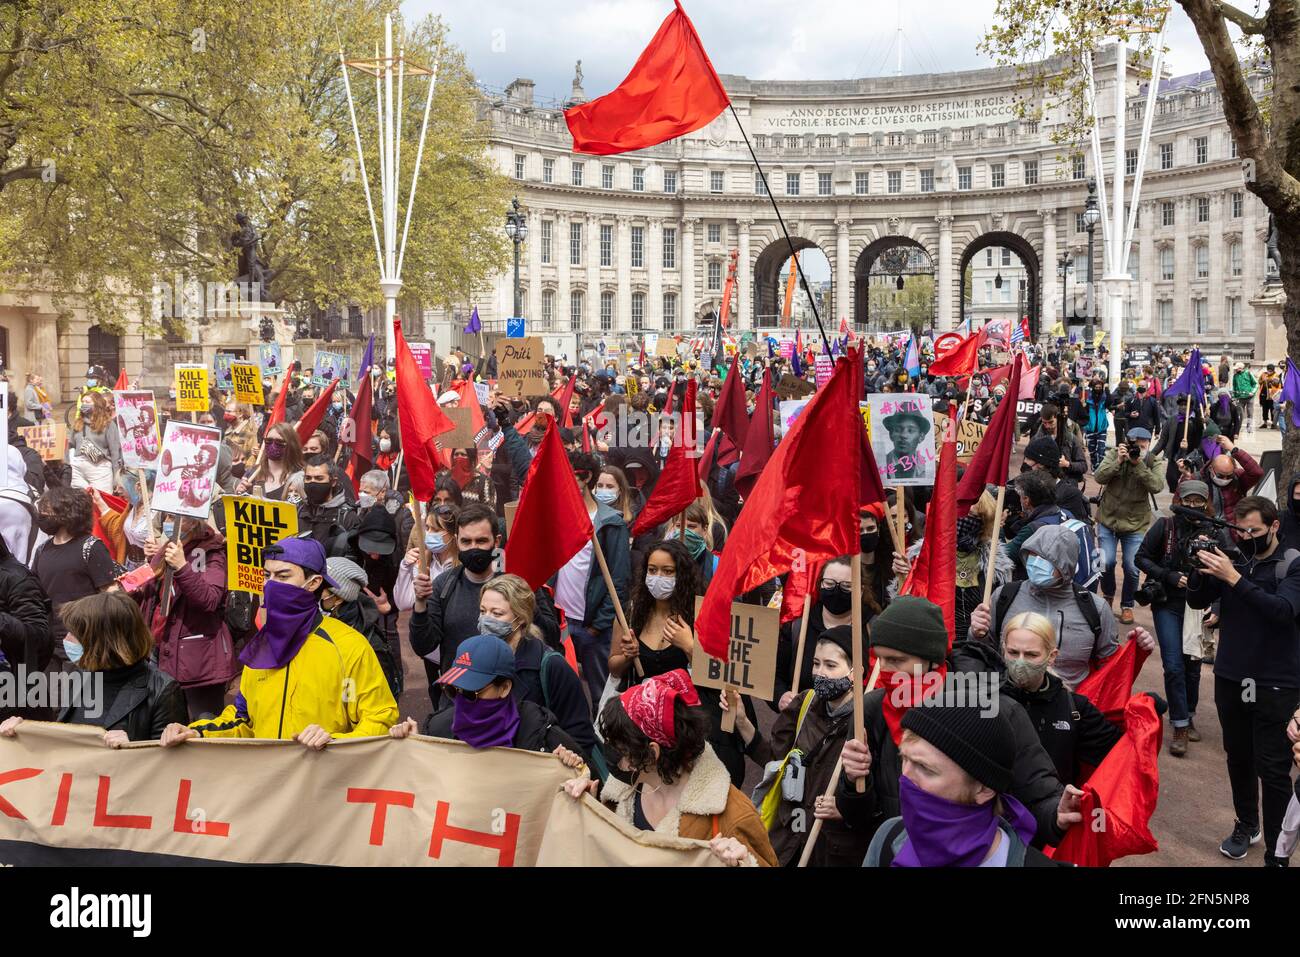 Marching crowd with flags and placards during 'Kill the Bill' protest against new policing bill, London, 1 May 2021 Stock Photo